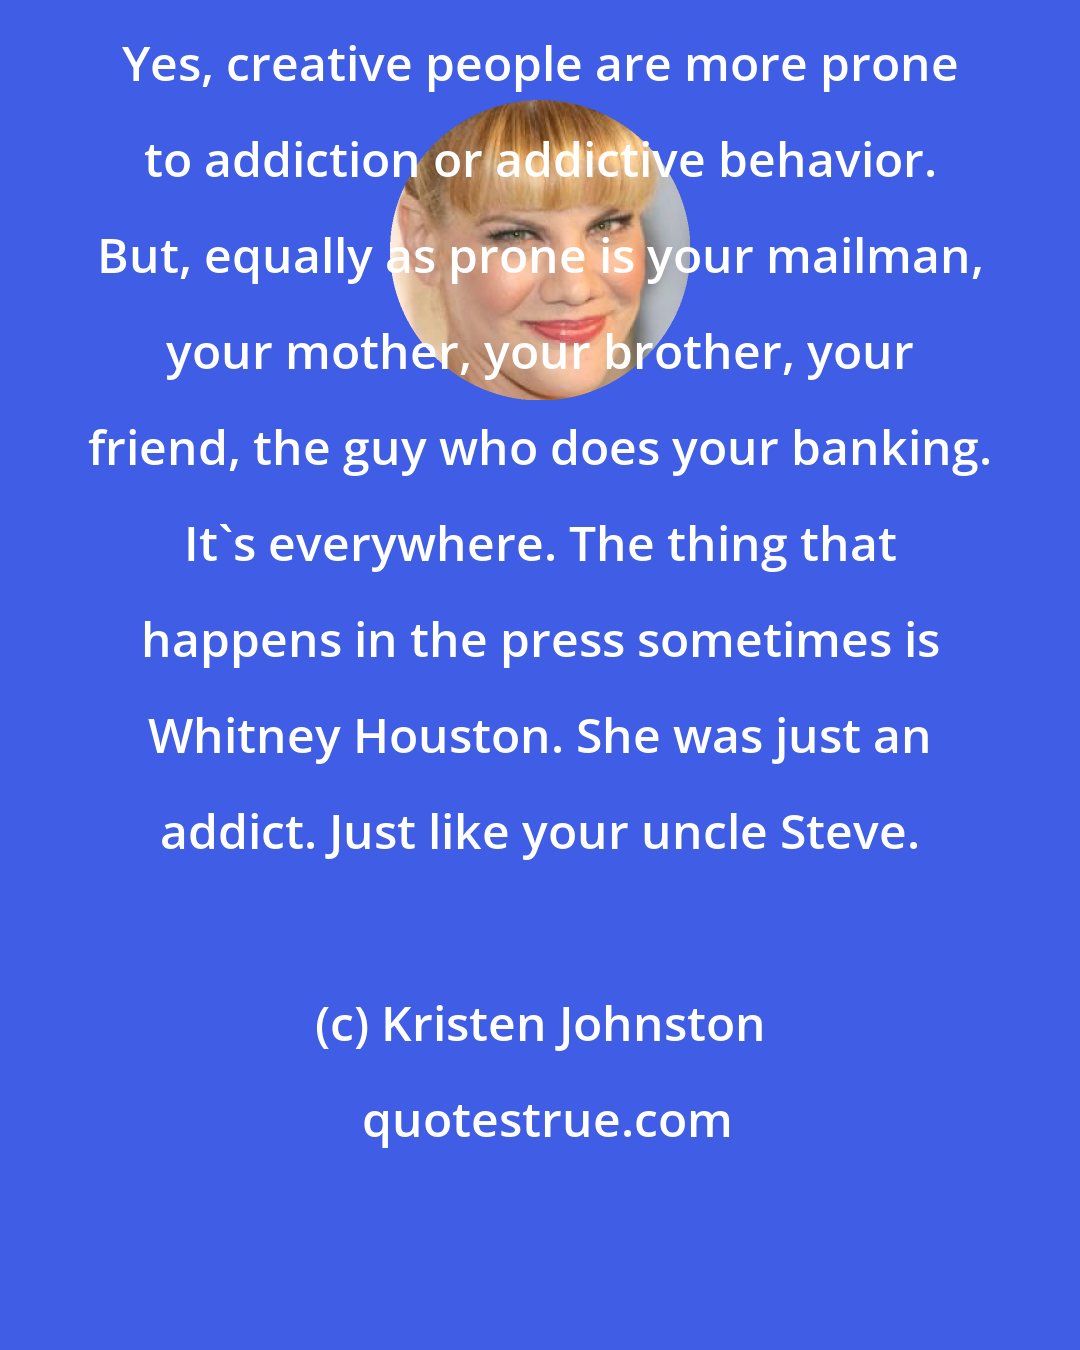 Kristen Johnston: Yes, creative people are more prone to addiction or addictive behavior. But, equally as prone is your mailman, your mother, your brother, your friend, the guy who does your banking. It's everywhere. The thing that happens in the press sometimes is Whitney Houston. She was just an addict. Just like your uncle Steve.